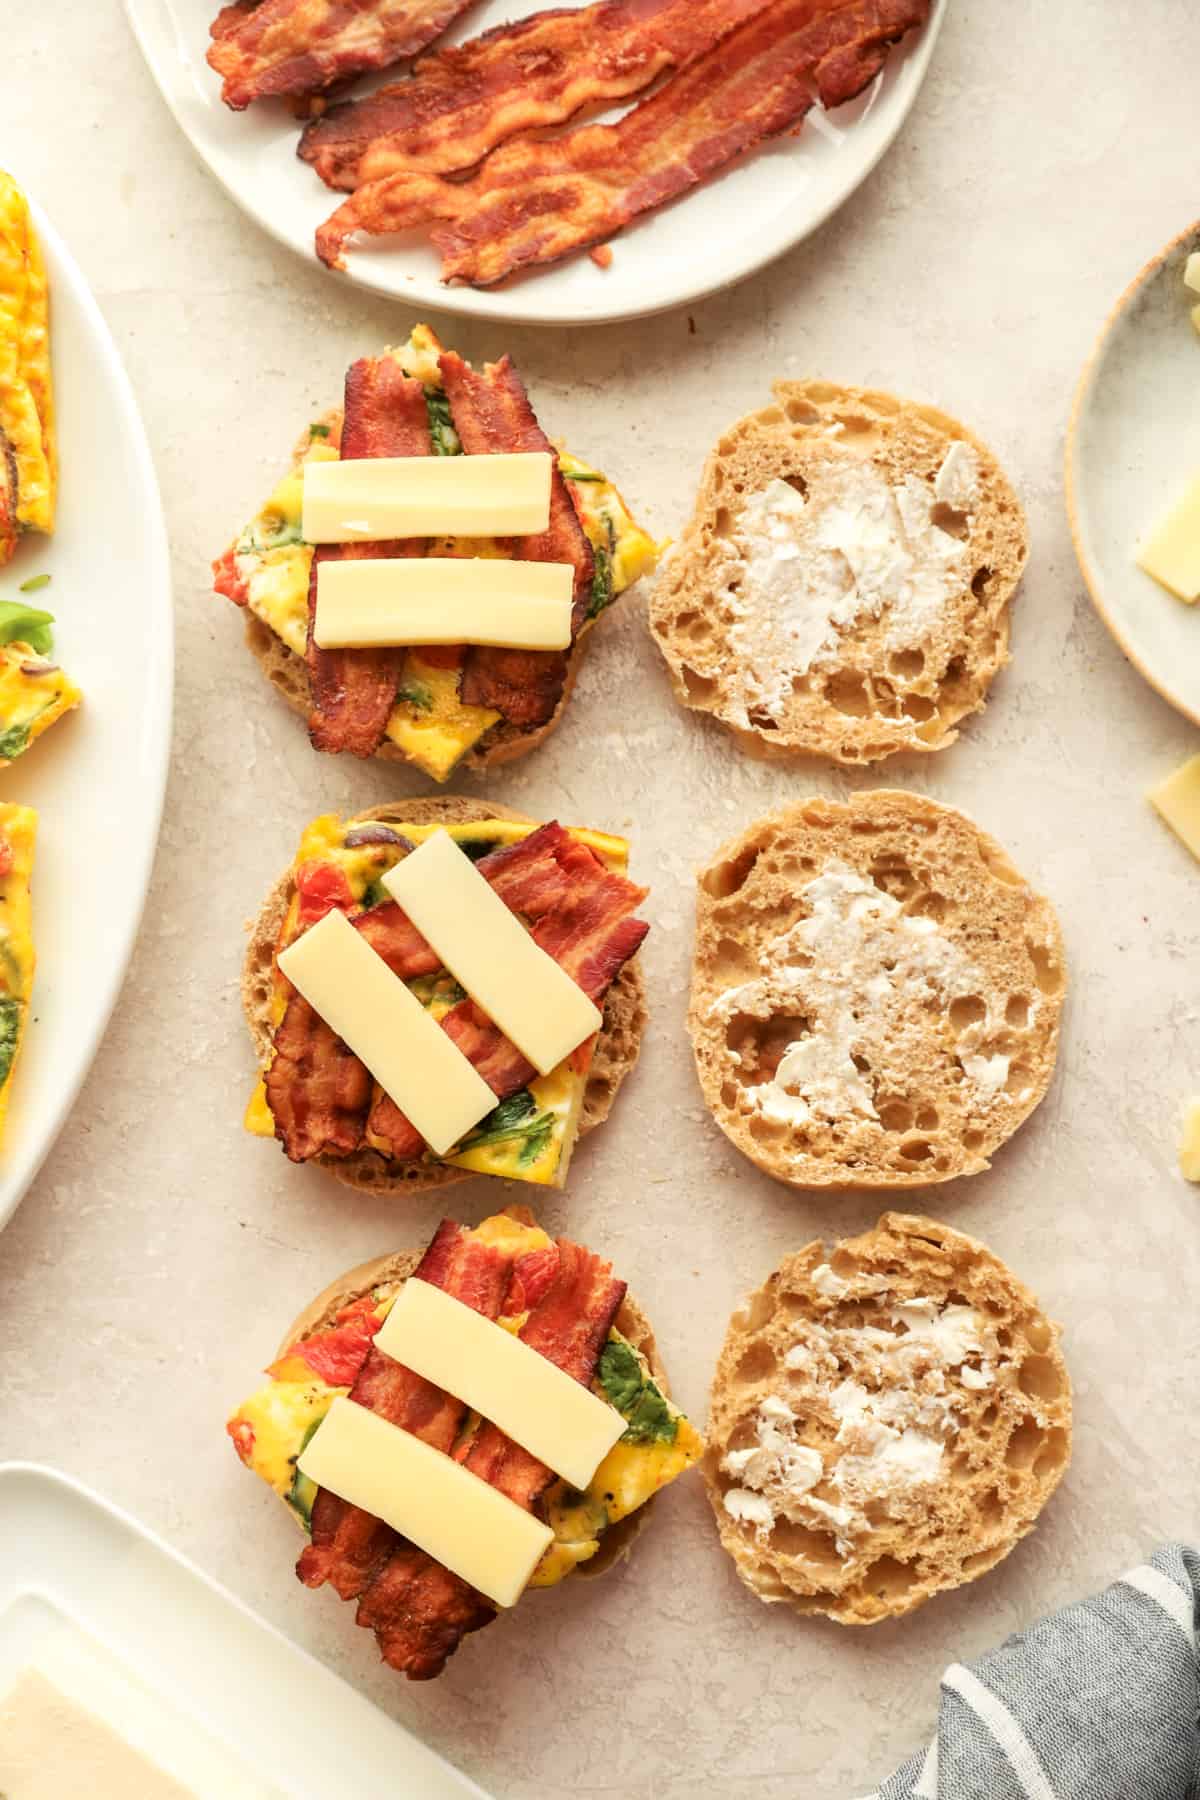 freezer breakfast sandwiches being layered with toppings.